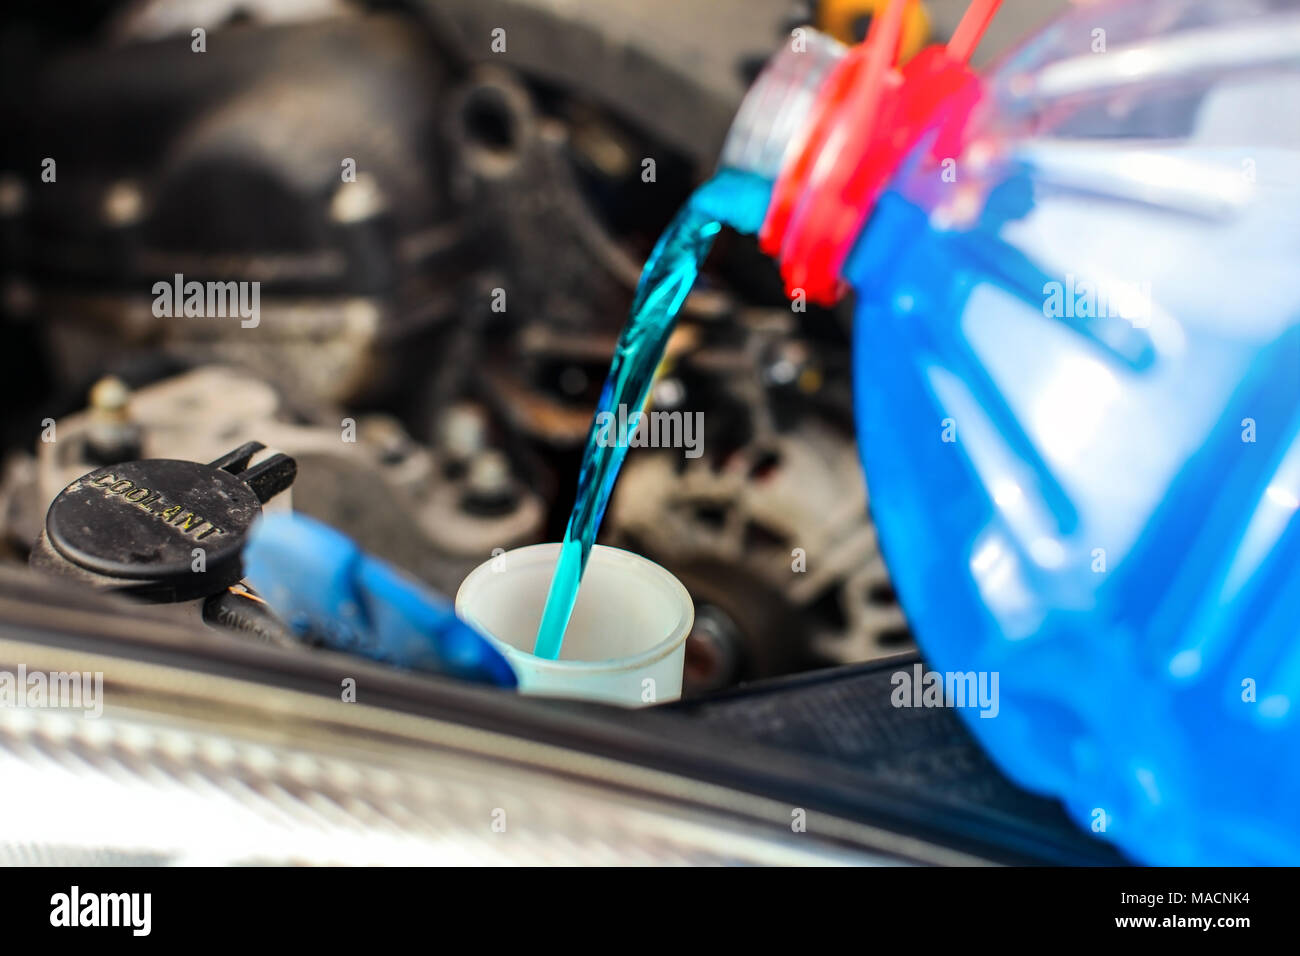 Detail on antifreeze car screen wash liquid pouring into dirty car from blue and red anti freeze water container. Stock Photo